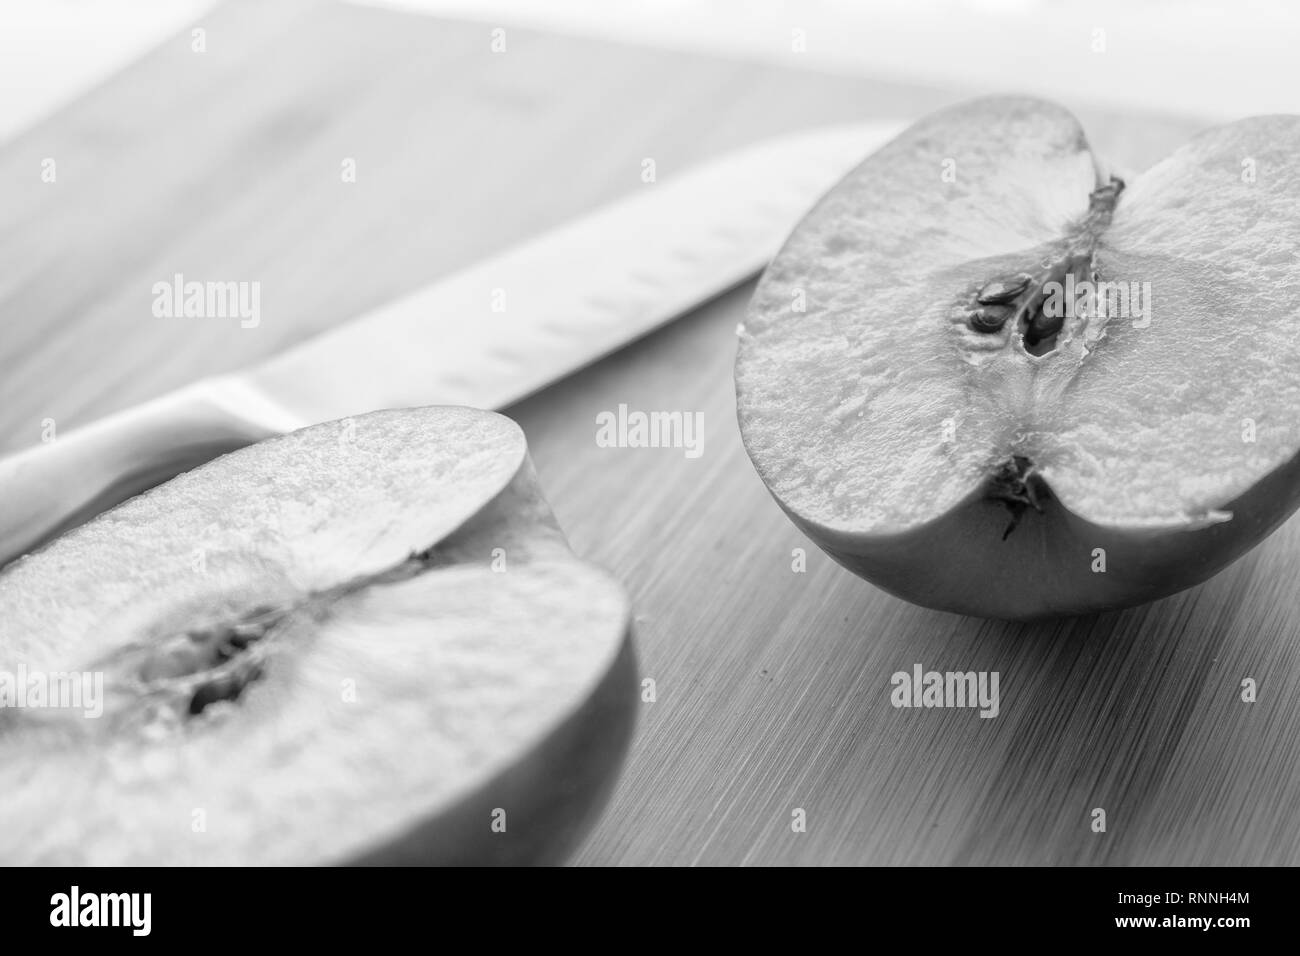 Sliced apple on bamboo cutting board with knife Stock Photo